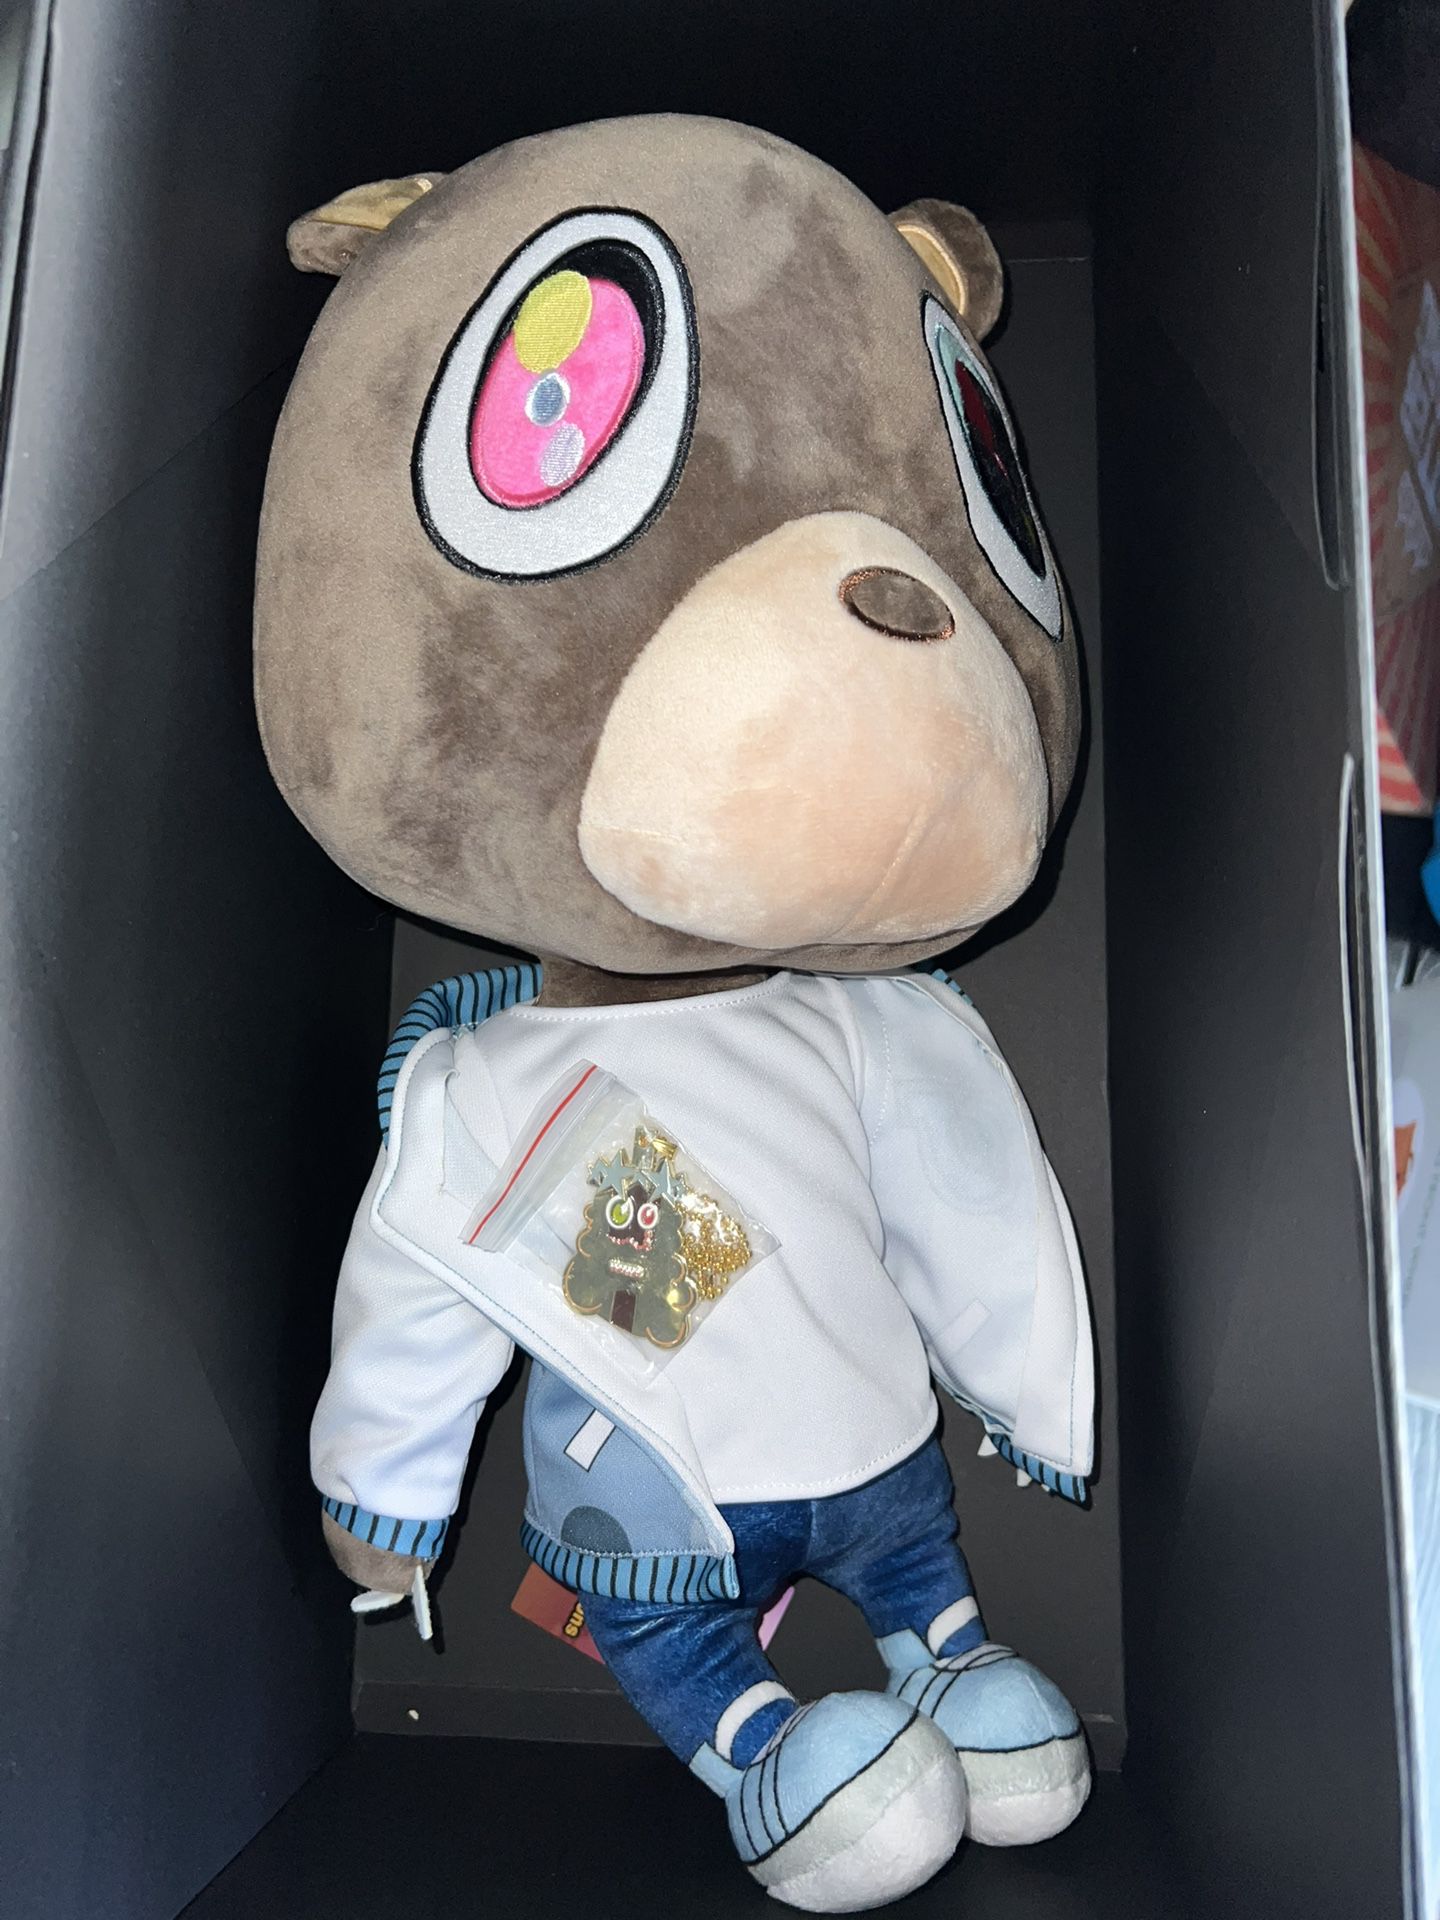 Gredee arts kanye west graduation 18 in bear plush soldout collectible